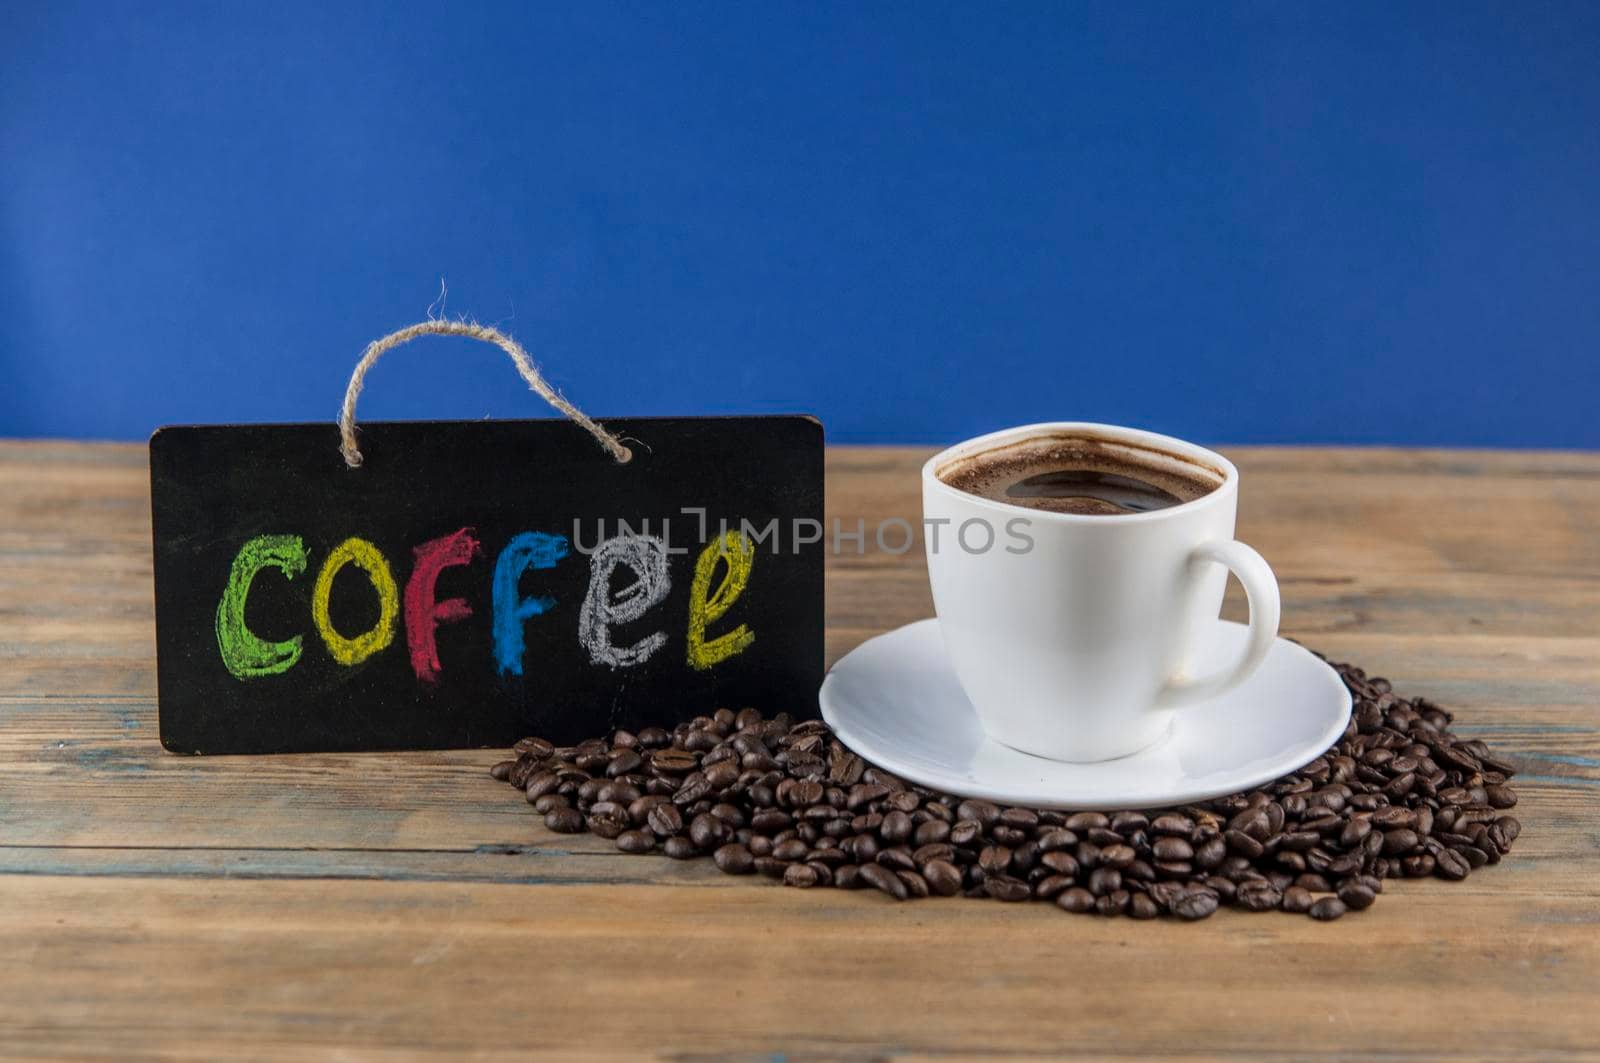 White ceramic cup of coffee and blackboard with inscription "coffee" writen colorful alphabet. Coffee break, morning awakening concept.